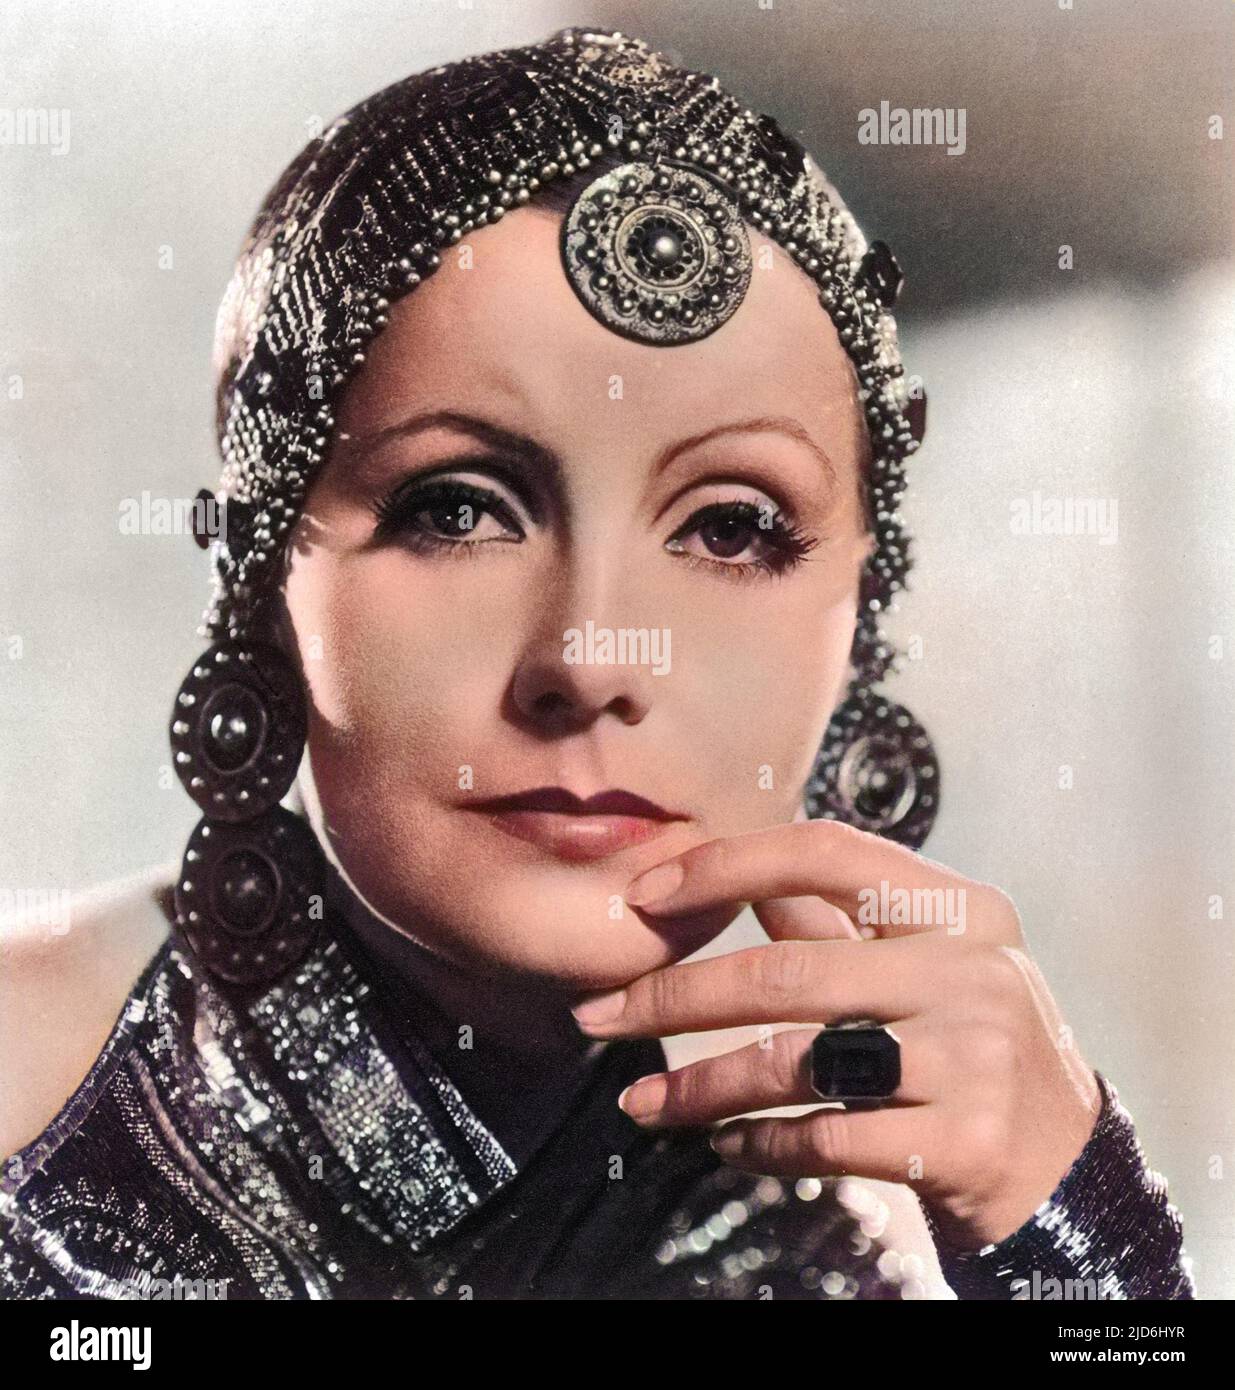 Greta Garbo  (1905 - 1990), as Mata Hari. Greta Garbo was born in Stockholm and was 'spotted' whilst studying at the Royal Theatre Dramatic School by the Swedish director Mauritz Stiller. Her first Hollywood film was 'The Temptress' 1926. Amongst her other successes are, 'Queen Christie' (1930), 'Anna Karenina' (1935) and 'Ninotchka' (1939). She retired from films in 1941, after receiving poor reviews for 'Two-Faced Woman.' She spent the rest of her life living as a recluse in New York. Colourised version of: 10222758       Date: 1932 Stock Photo